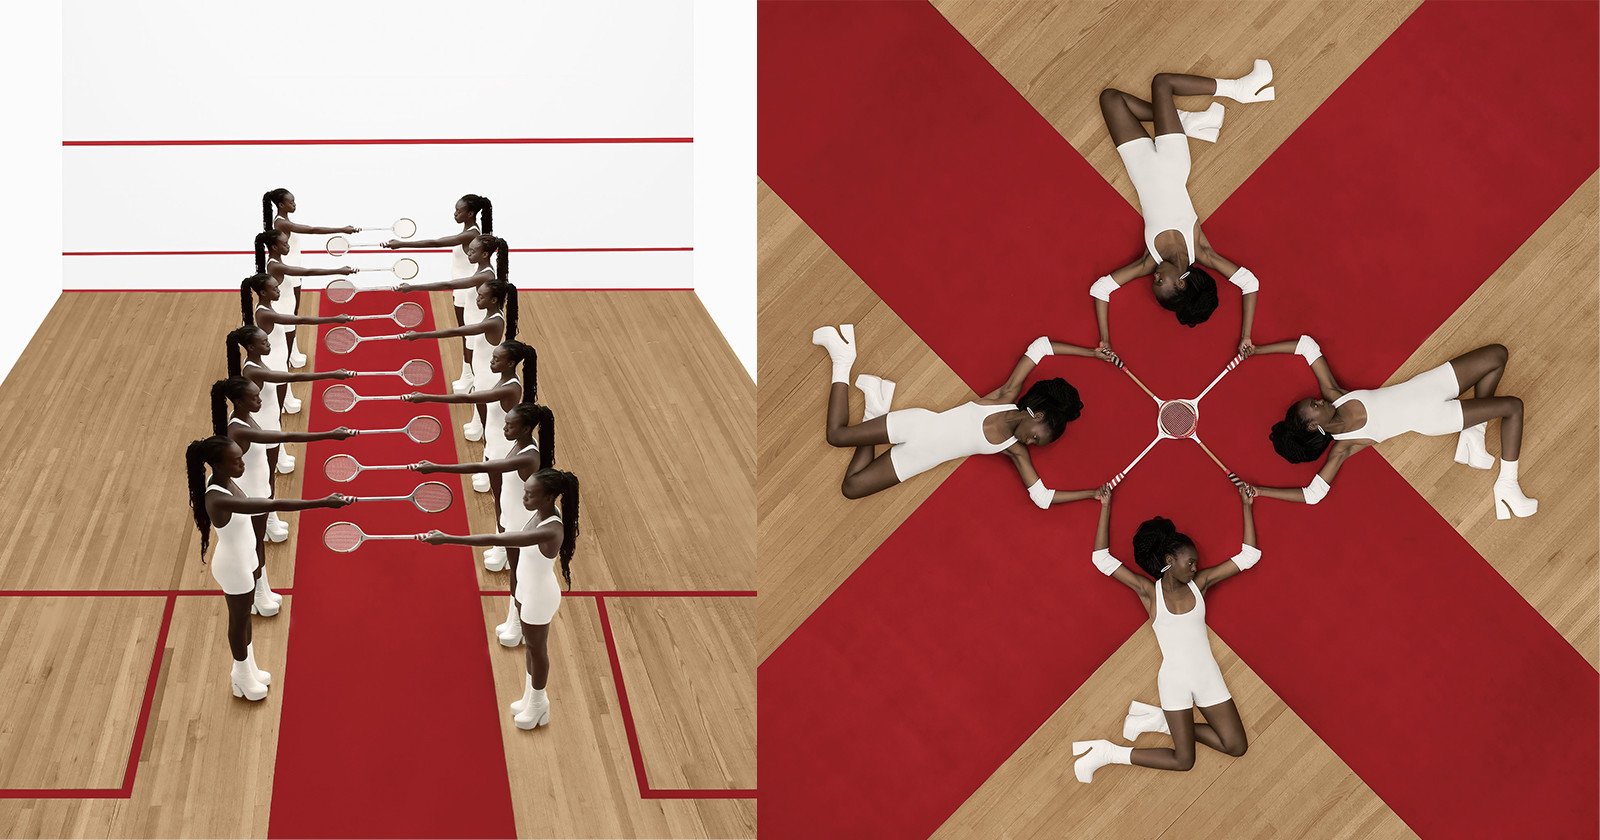 Geometric Photo Series Inside a Squash Court Was Shot with a Drone